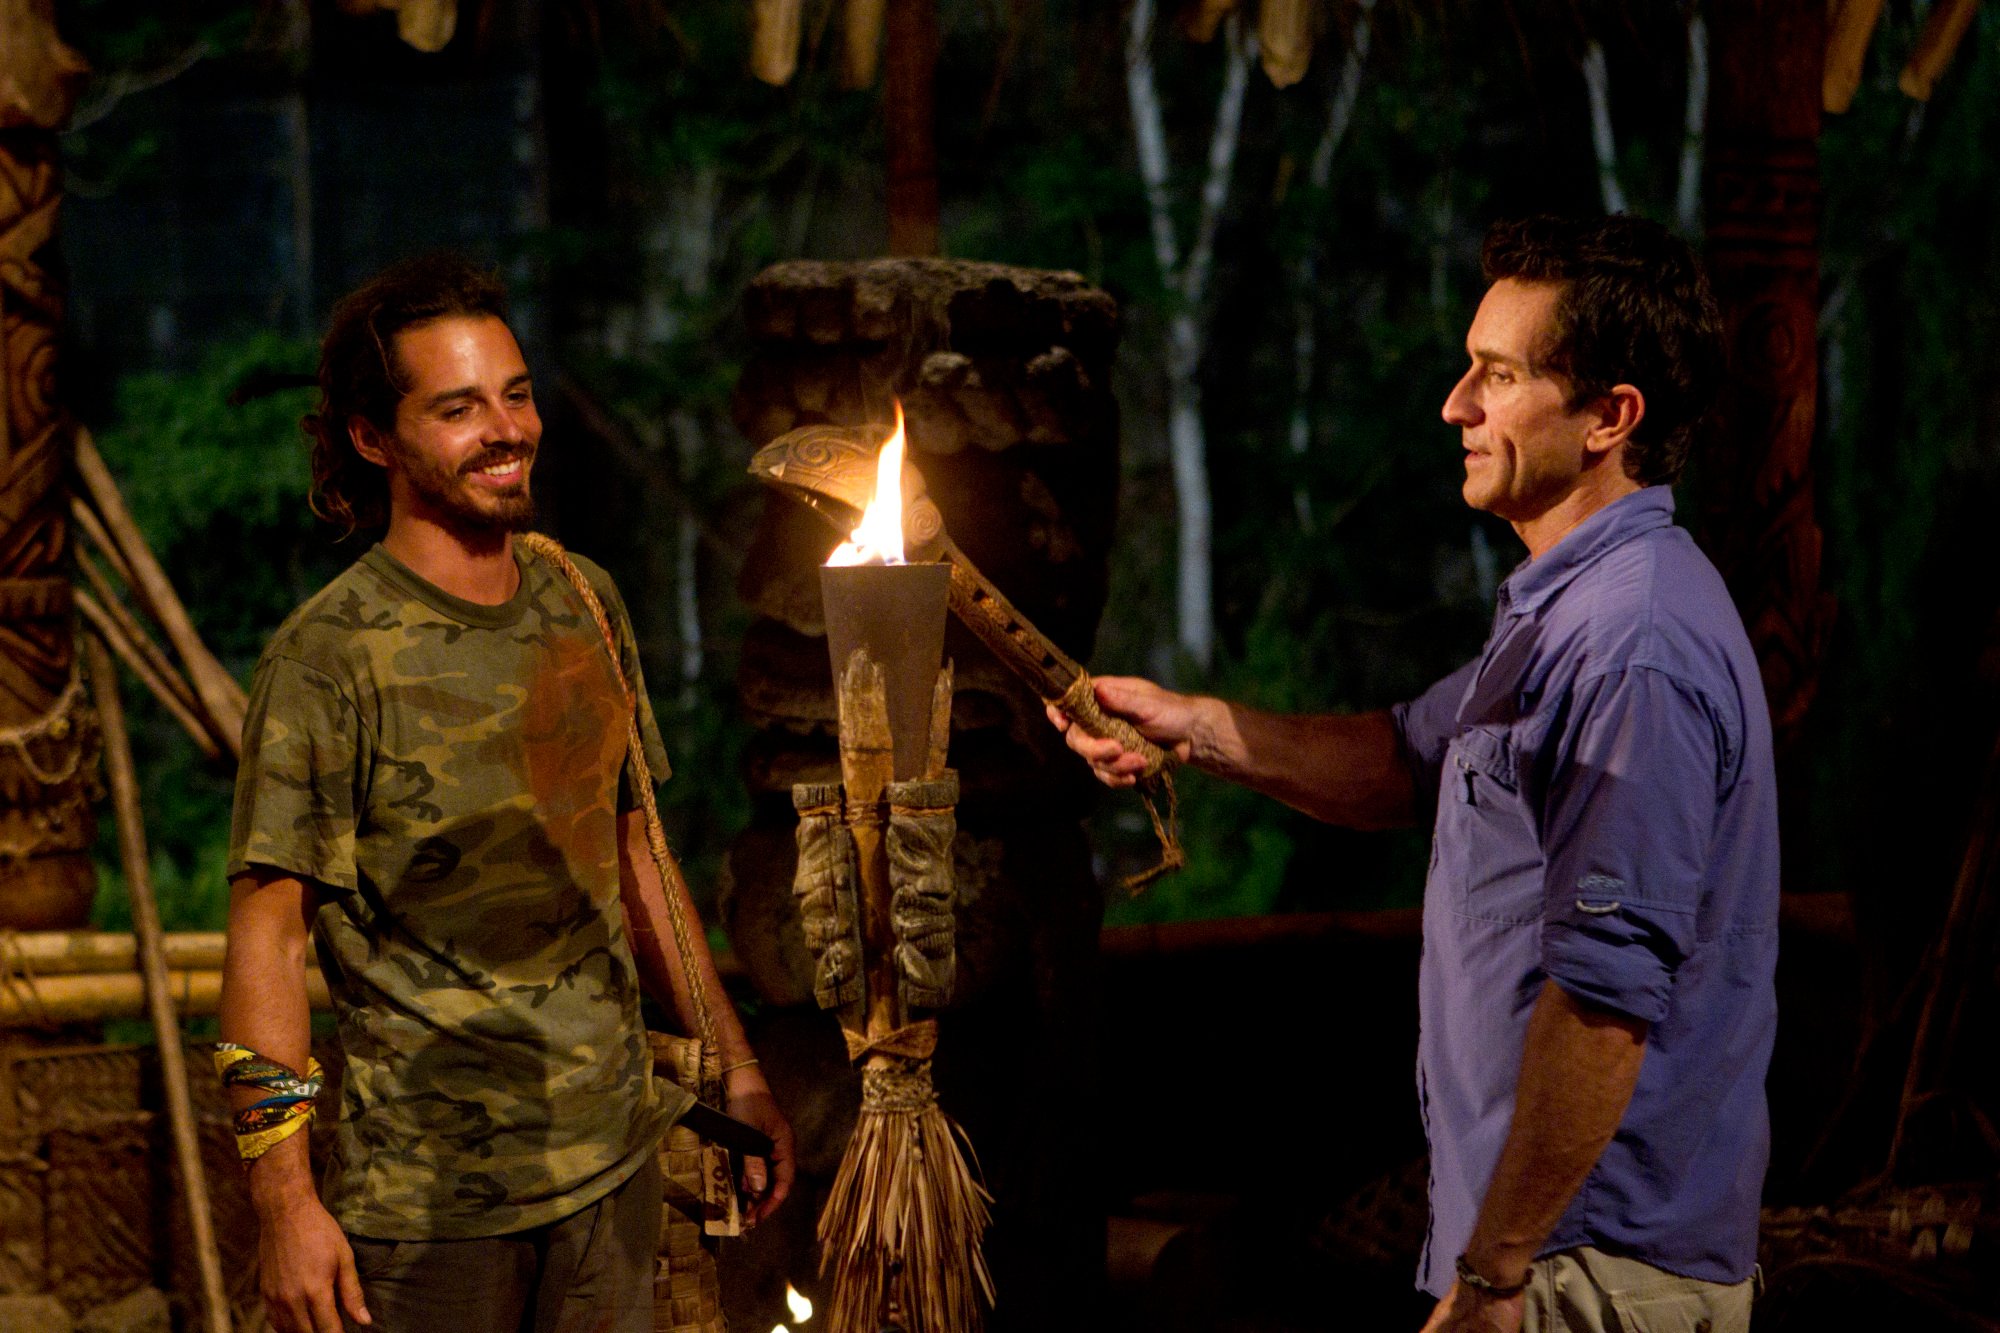 Ozzy Lusth, who is one of the most popular 'Survivor' castaways in the show's history, has his torch snuffed by host Jeff Probst in 'Survivor: South Pacific.' Ozzy wears a camo shirt and brown shorts. Jeff wears a blue button-up shirt and tan pants.